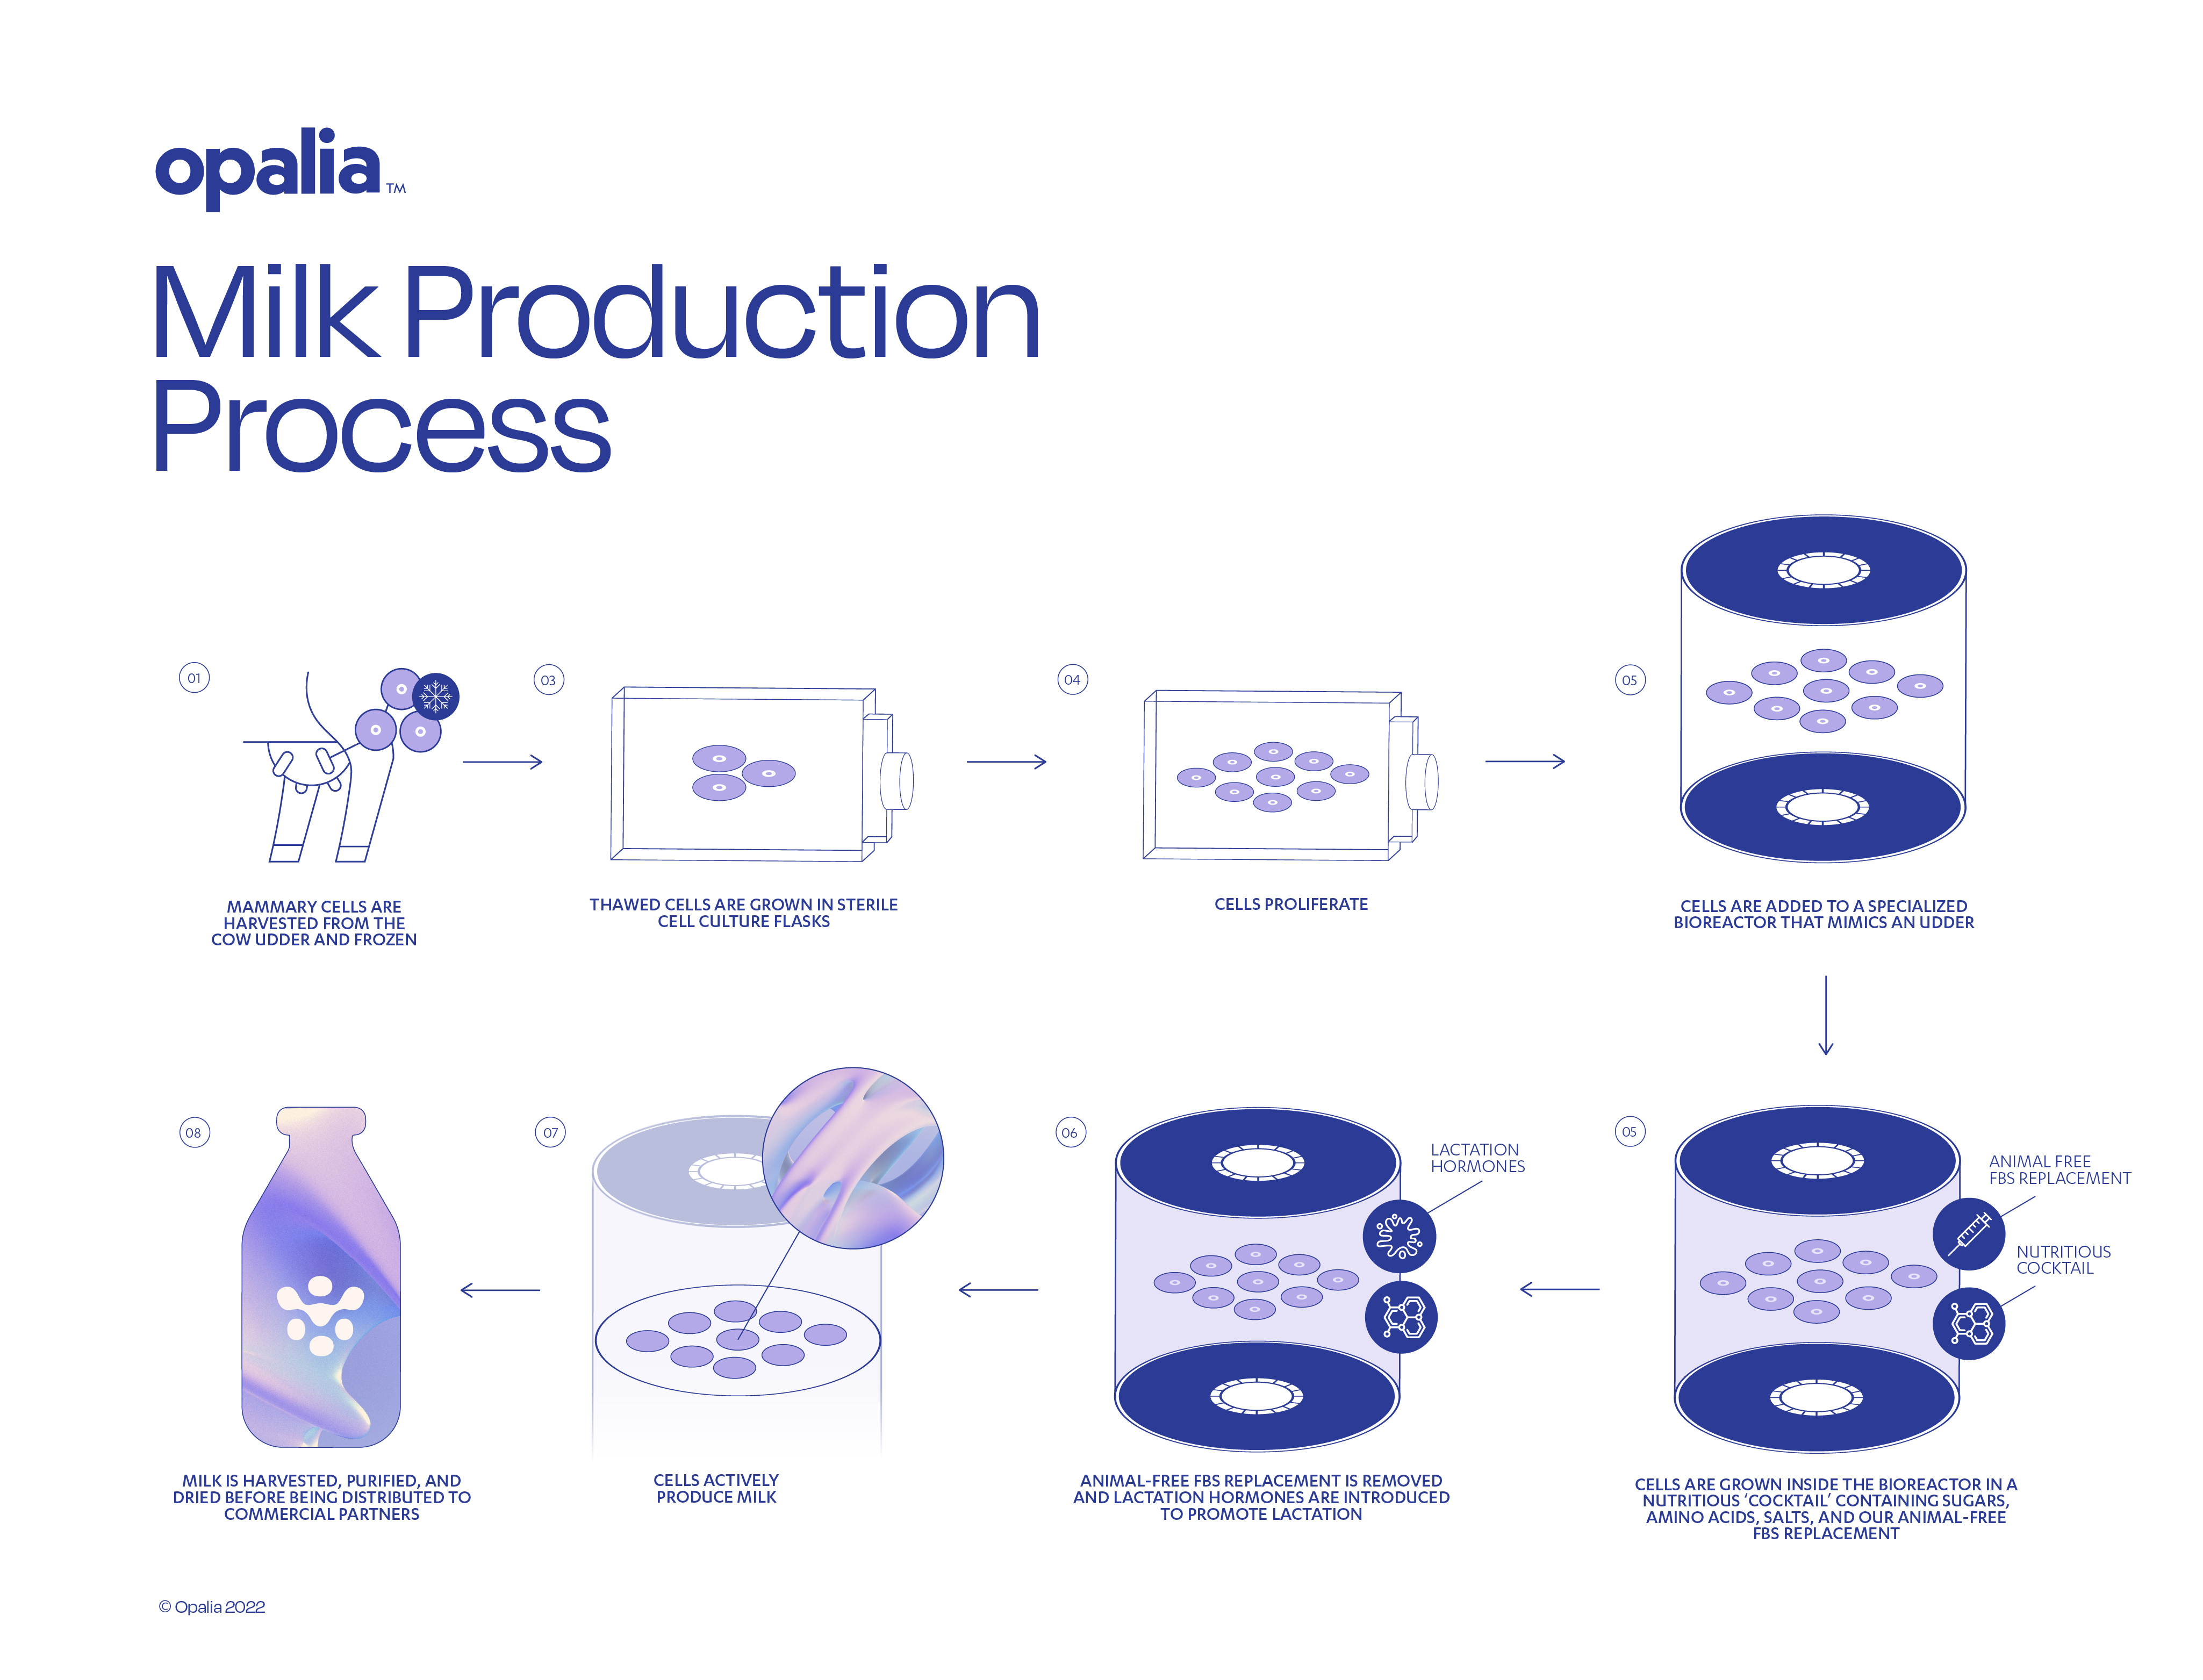 Opalia's patent-pending process uses real bovine mammary cells to make whole milk for sustainable and animal-free dairy products with no compromise on taste and texture.